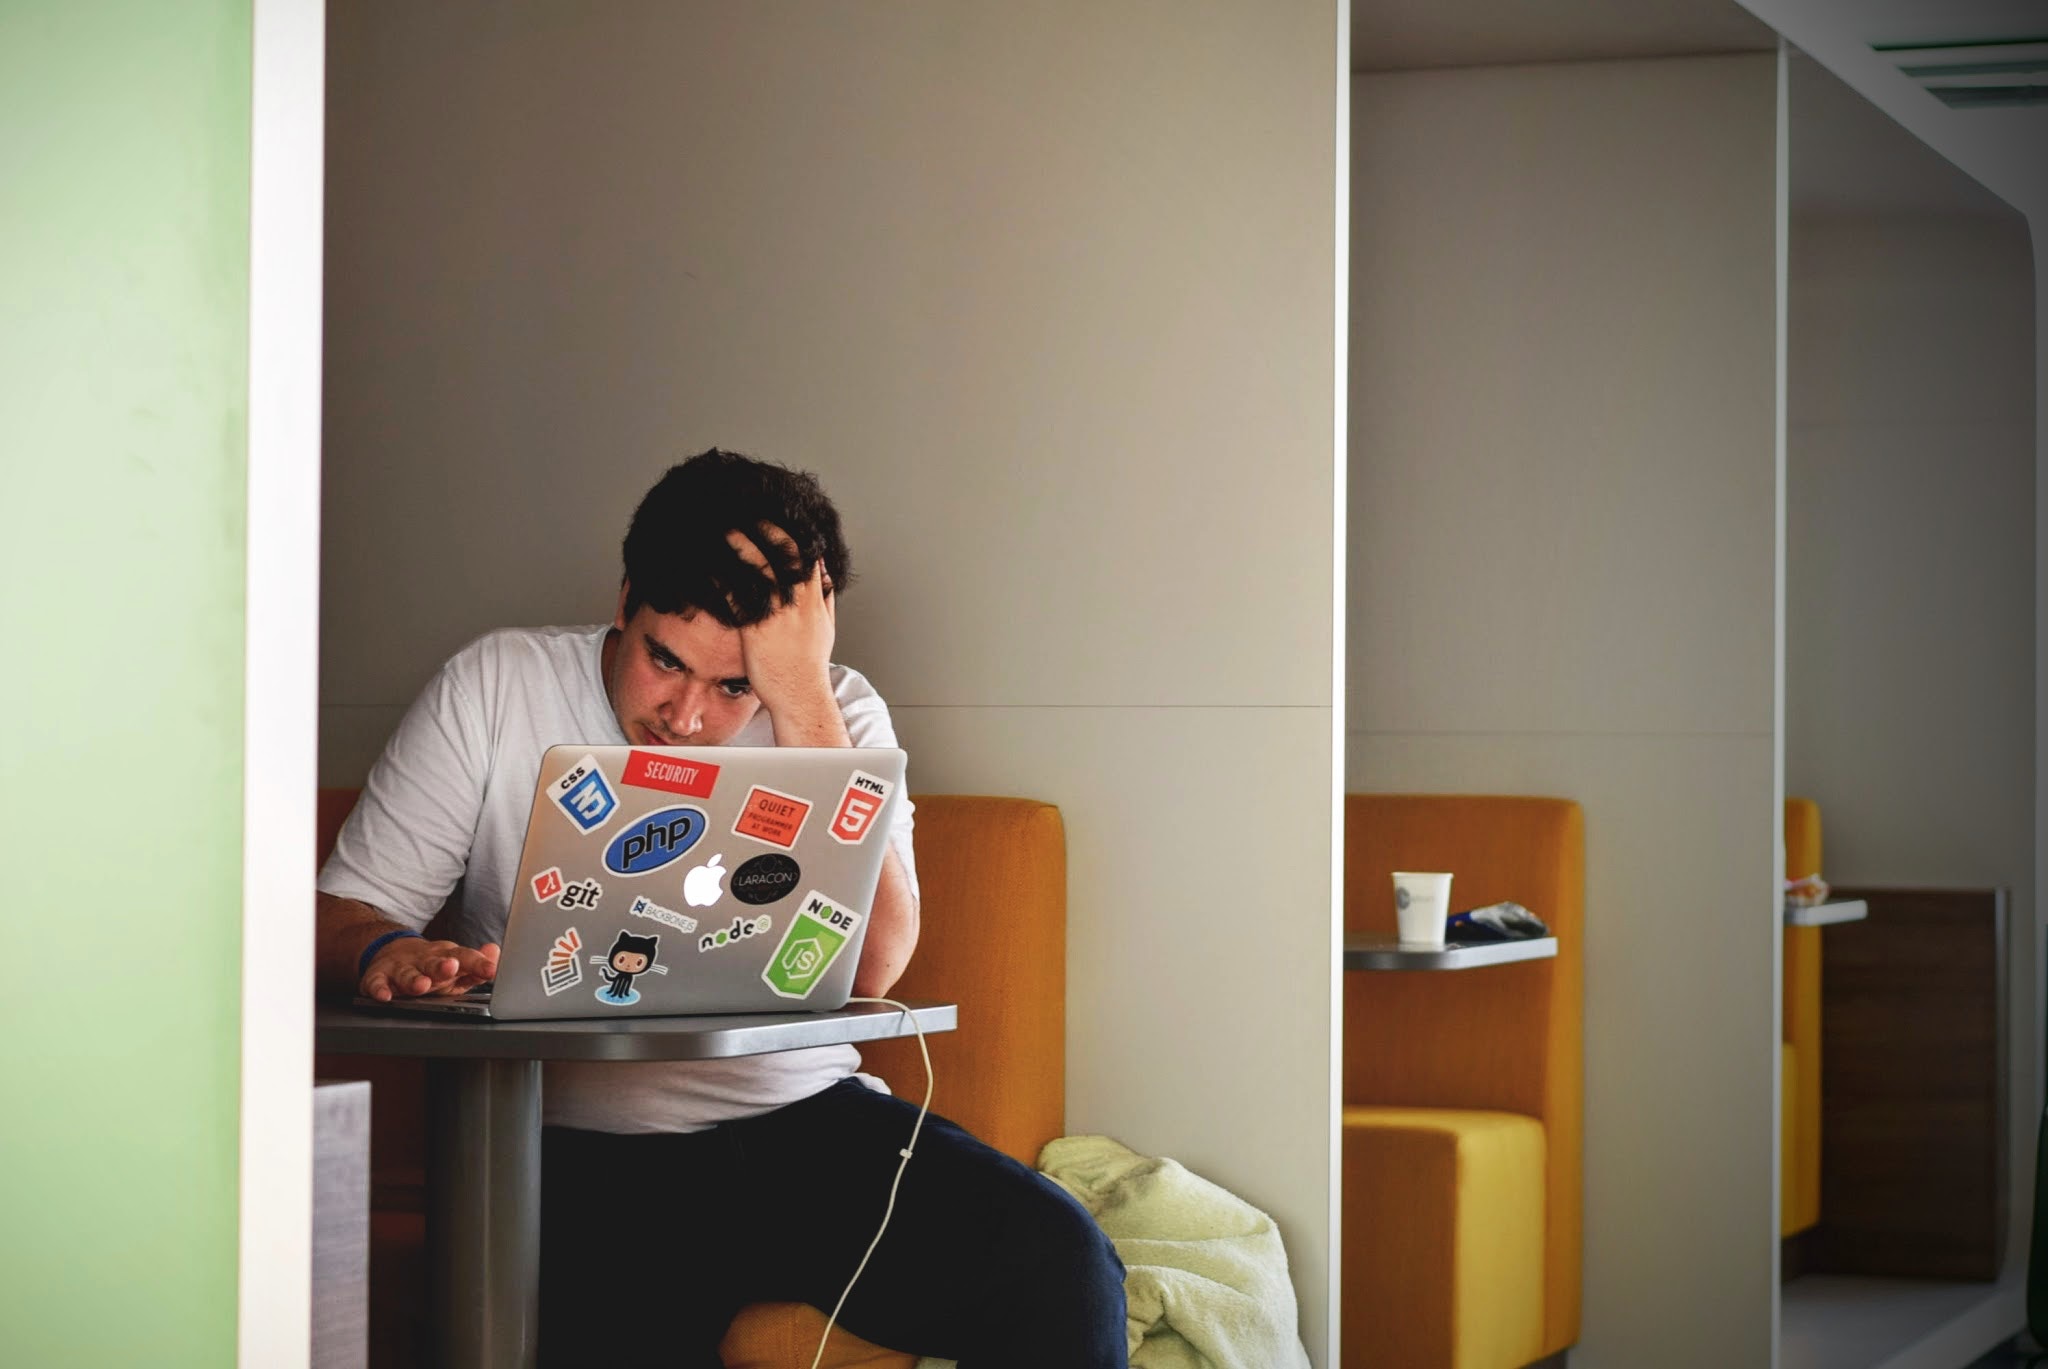 Image of a man who is frustrated and staring at his laptop.